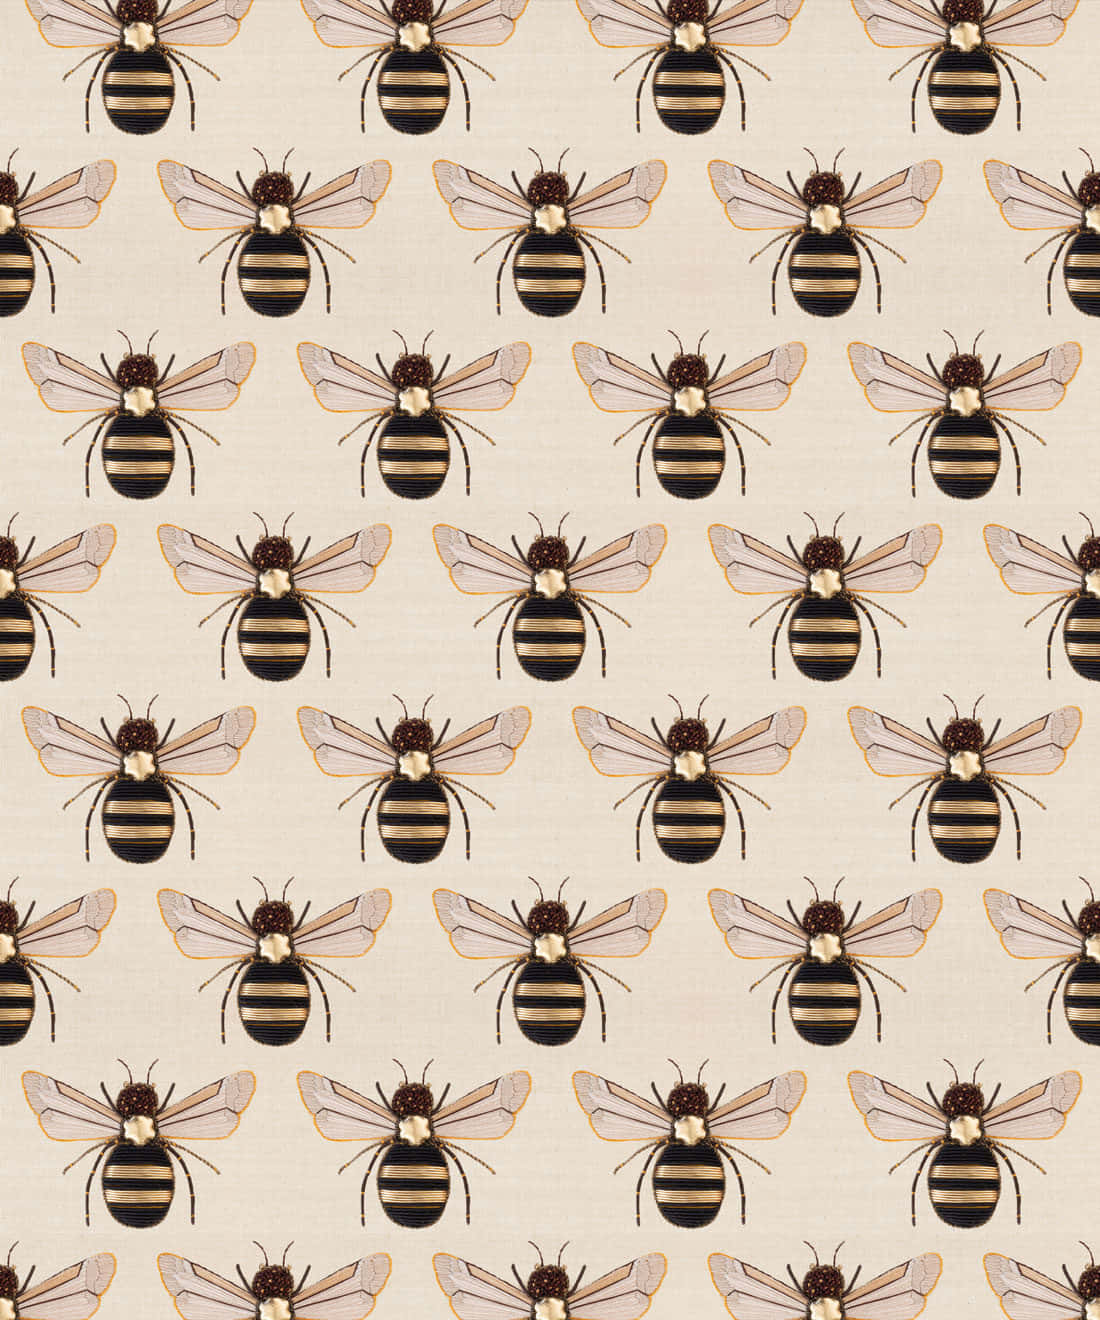 Bee Wall Insects Decor Wallpaper